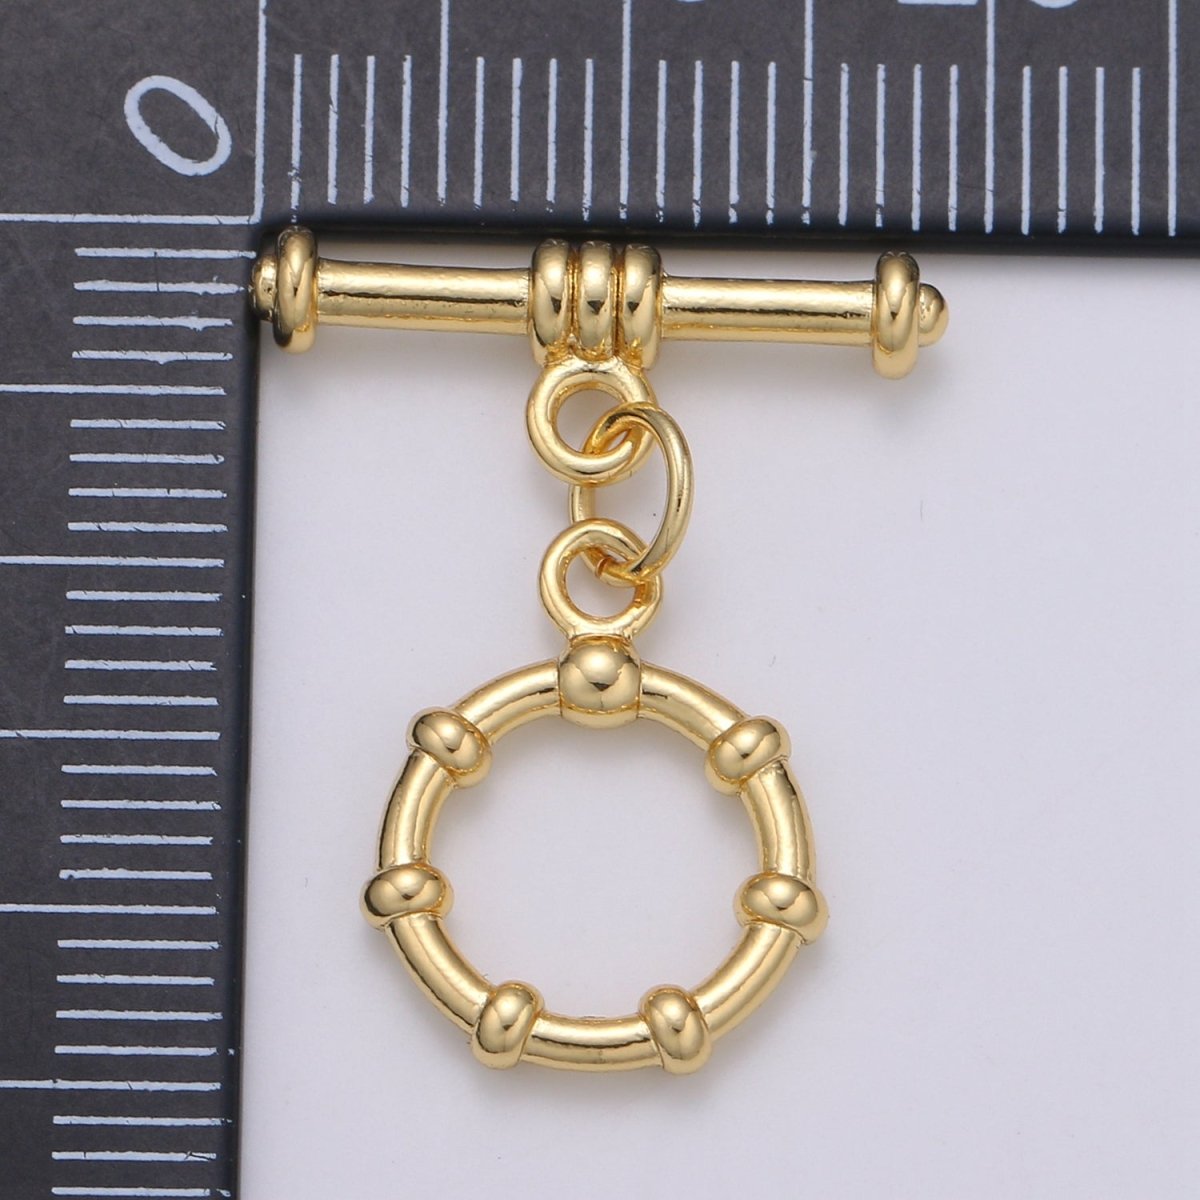 12 mm 24K Gold Buoy Toggle Clasp with jump ring Ship Wheel Clasp Ring, Charm Holder Clasp for Connector, Wristlet Holder L-143 - DLUXCA